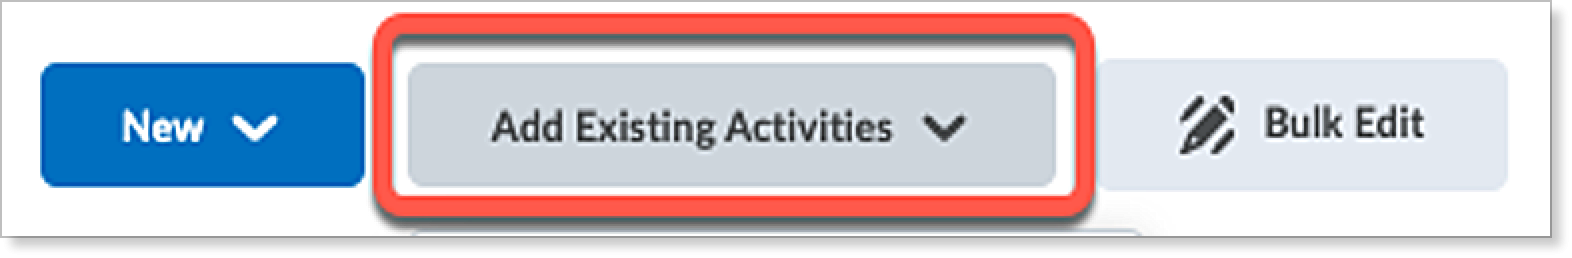 add existing activities